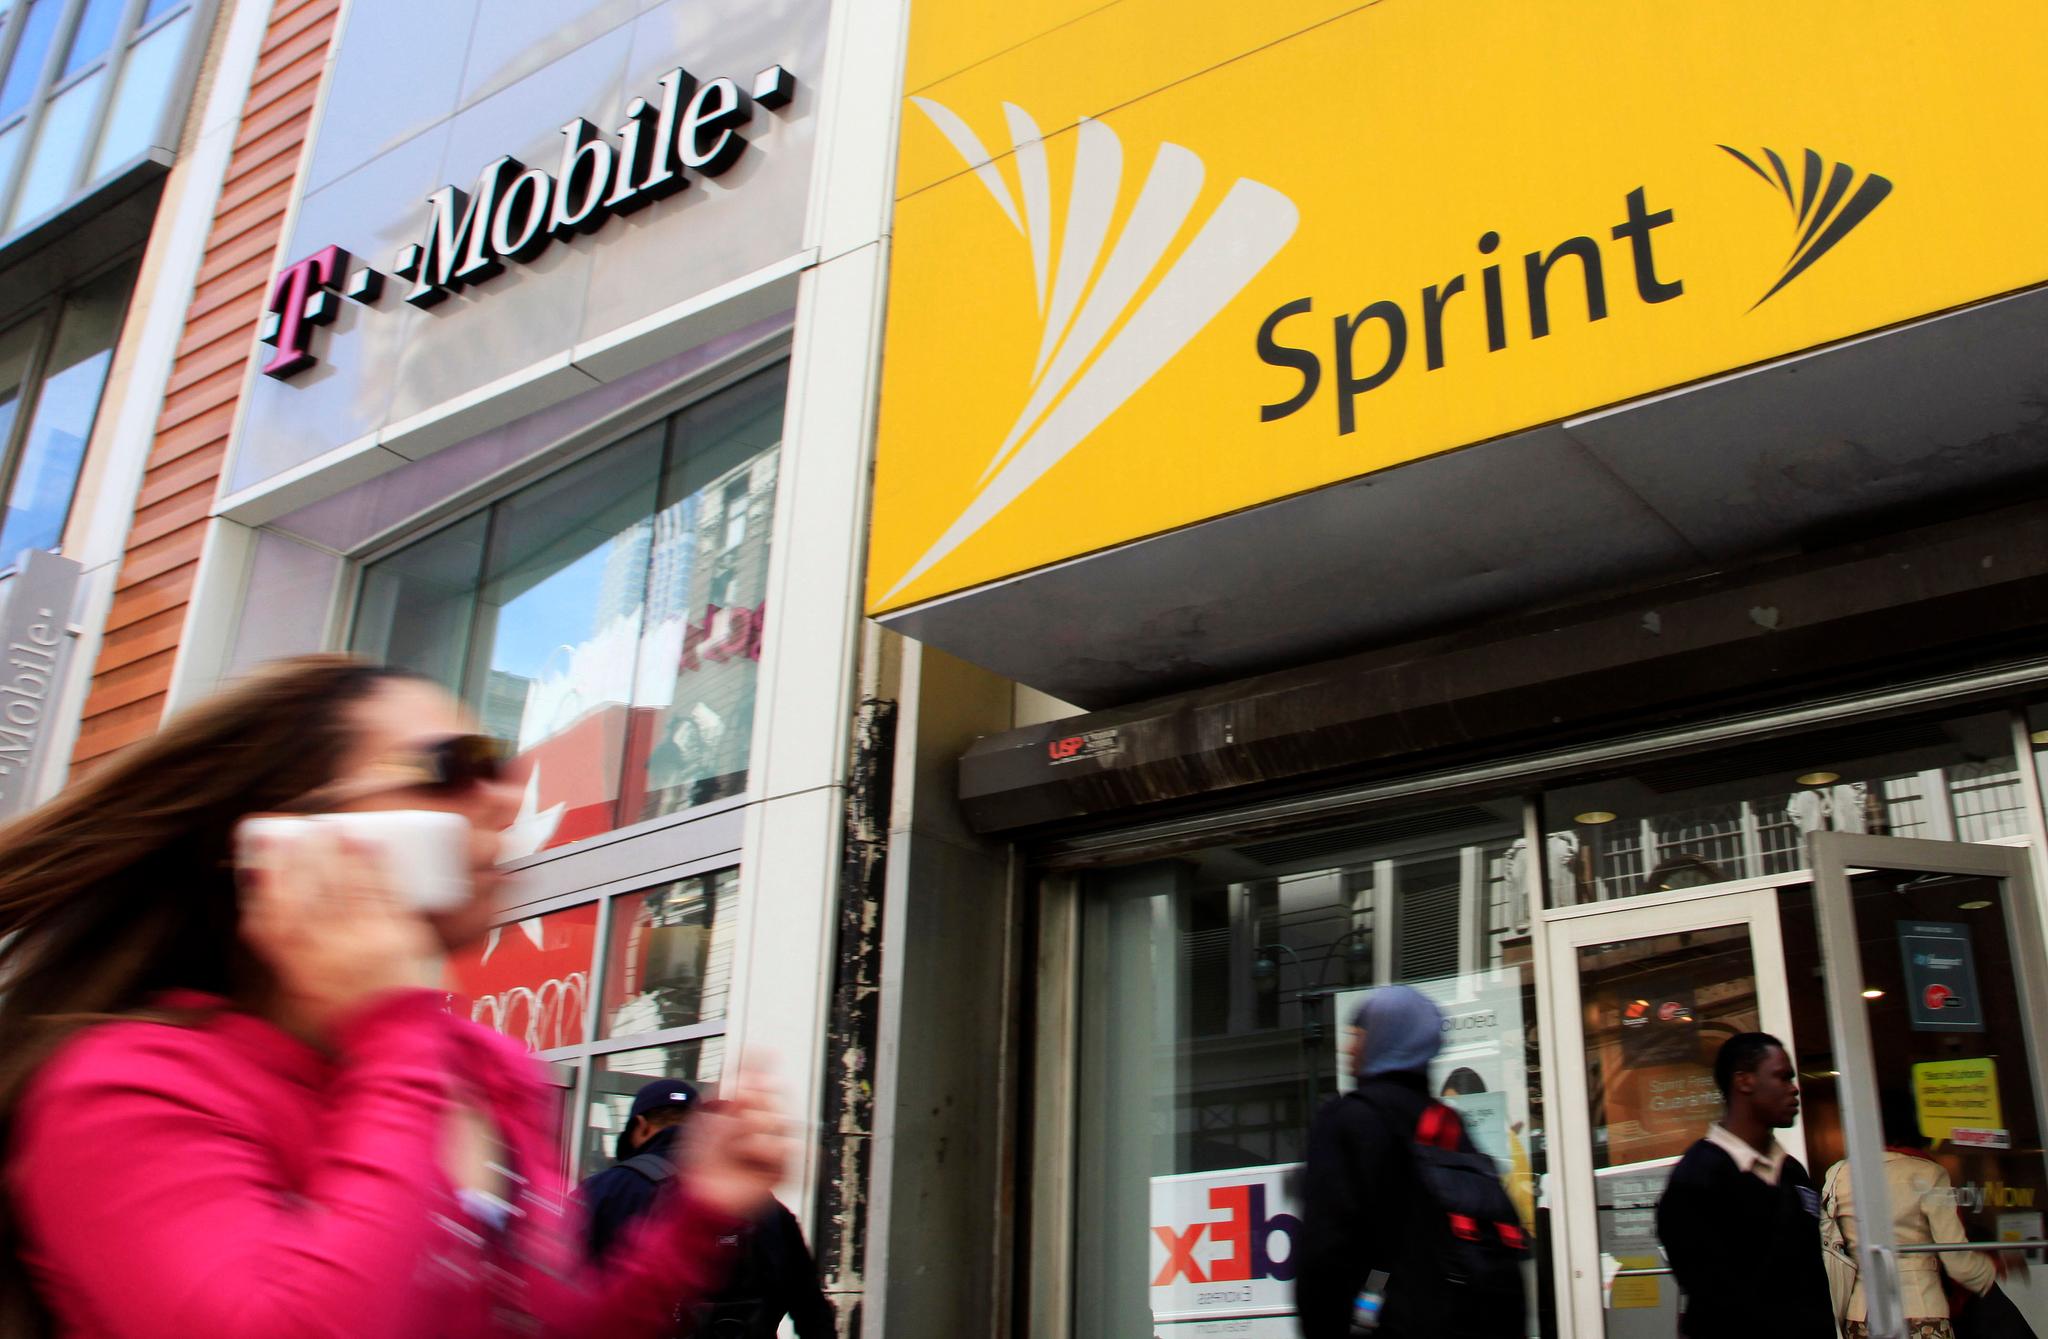 Sprint T-Mobile stores